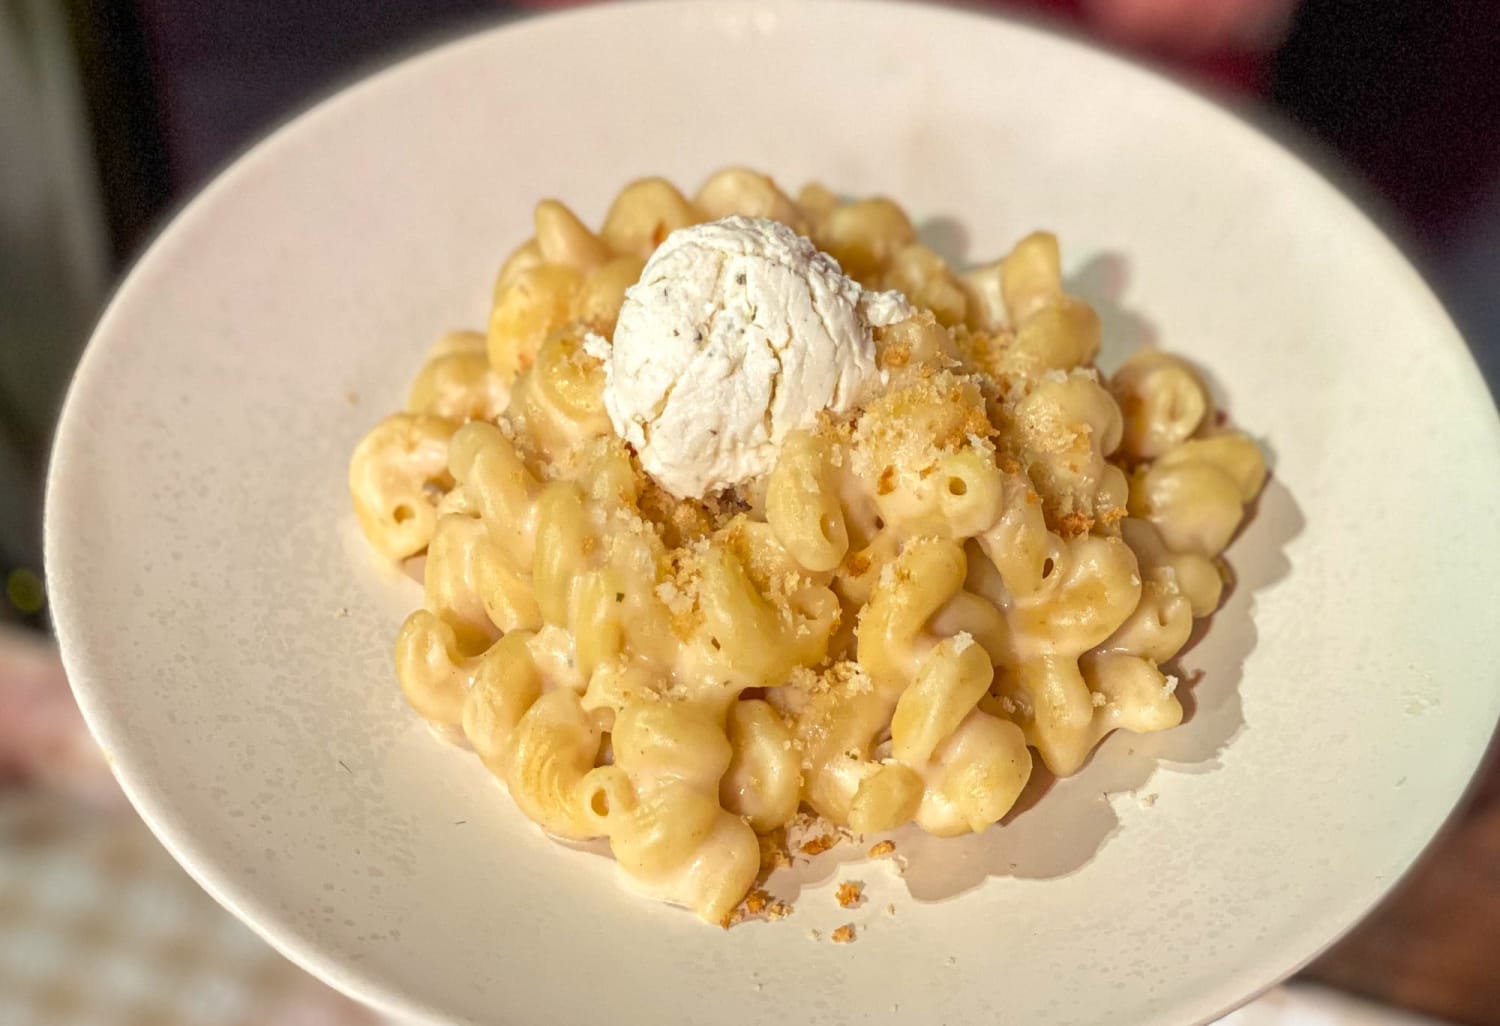 Tastiest macaroni and cheese upgrade is simply delicious